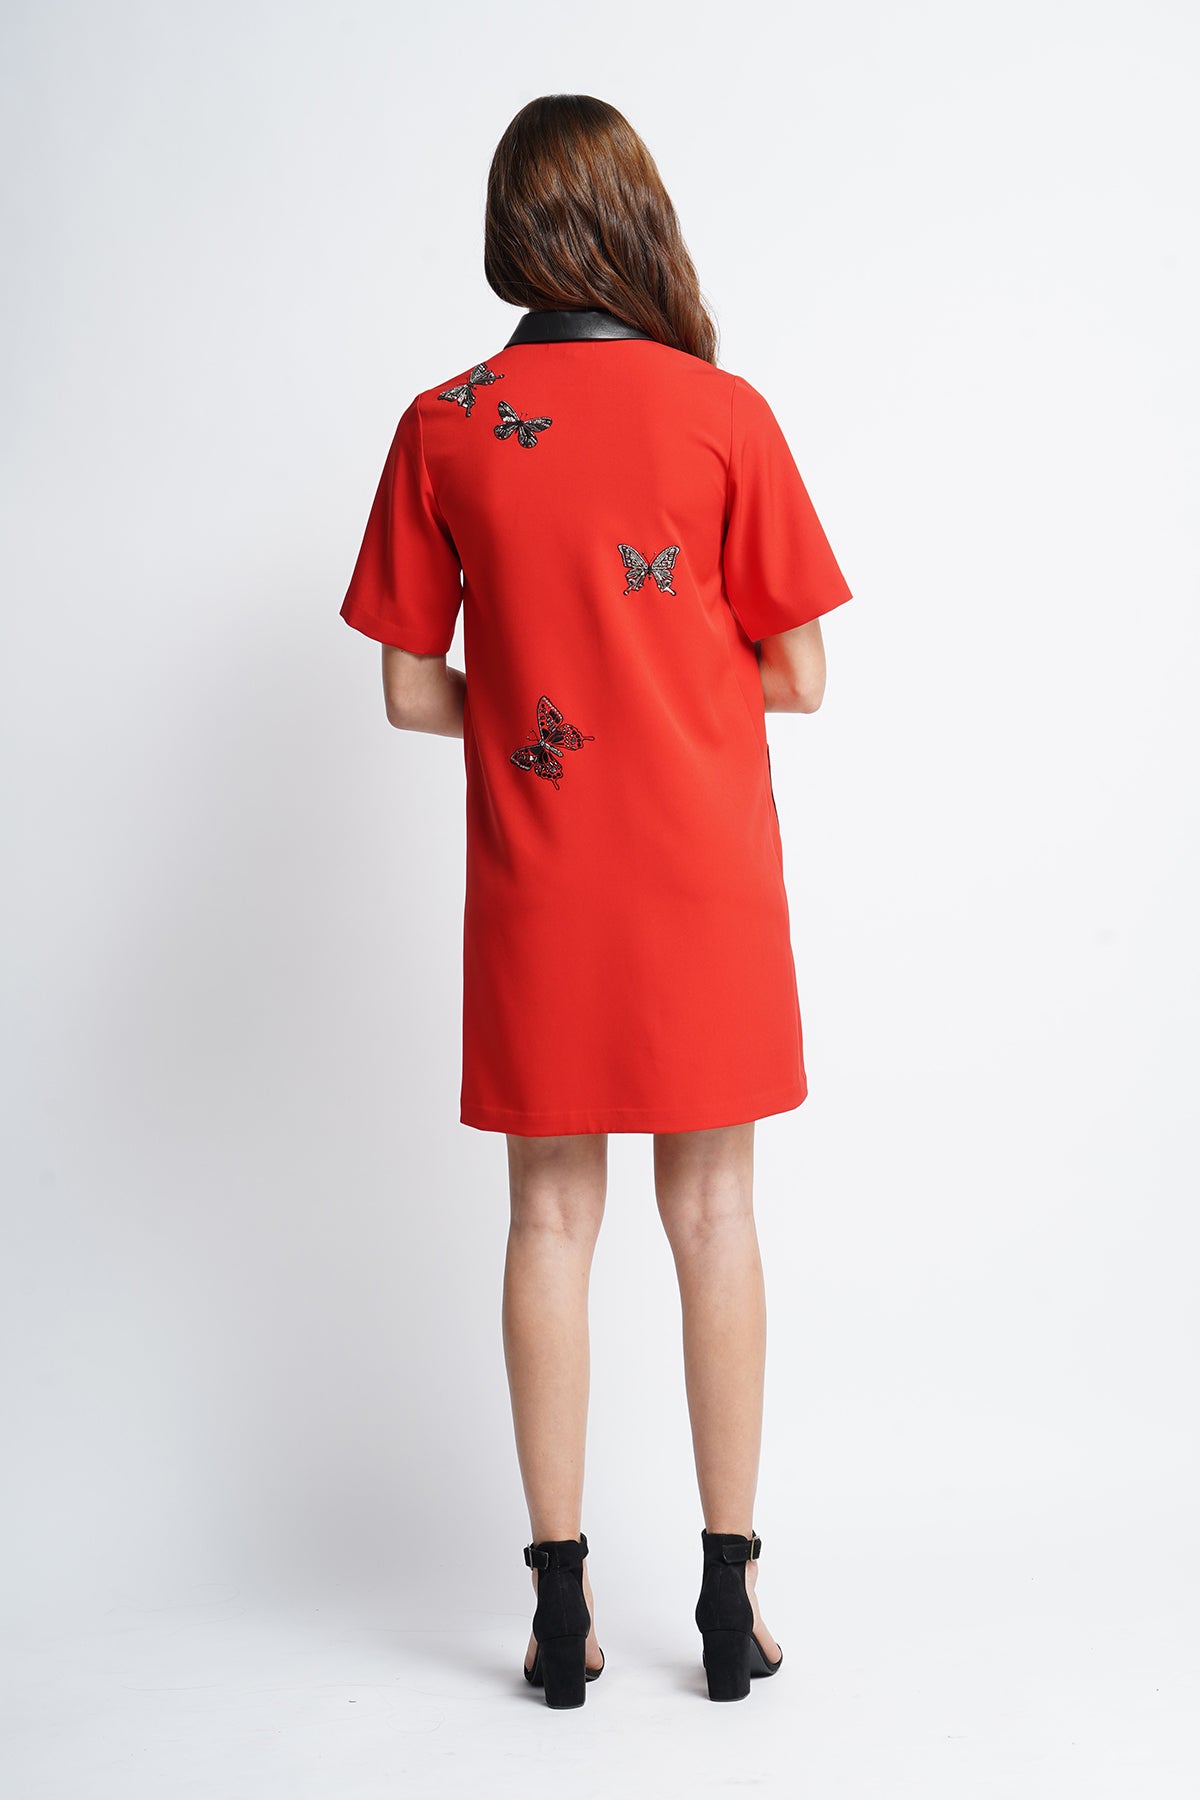 Cactus and Butterfly Shift Dress with Pockets